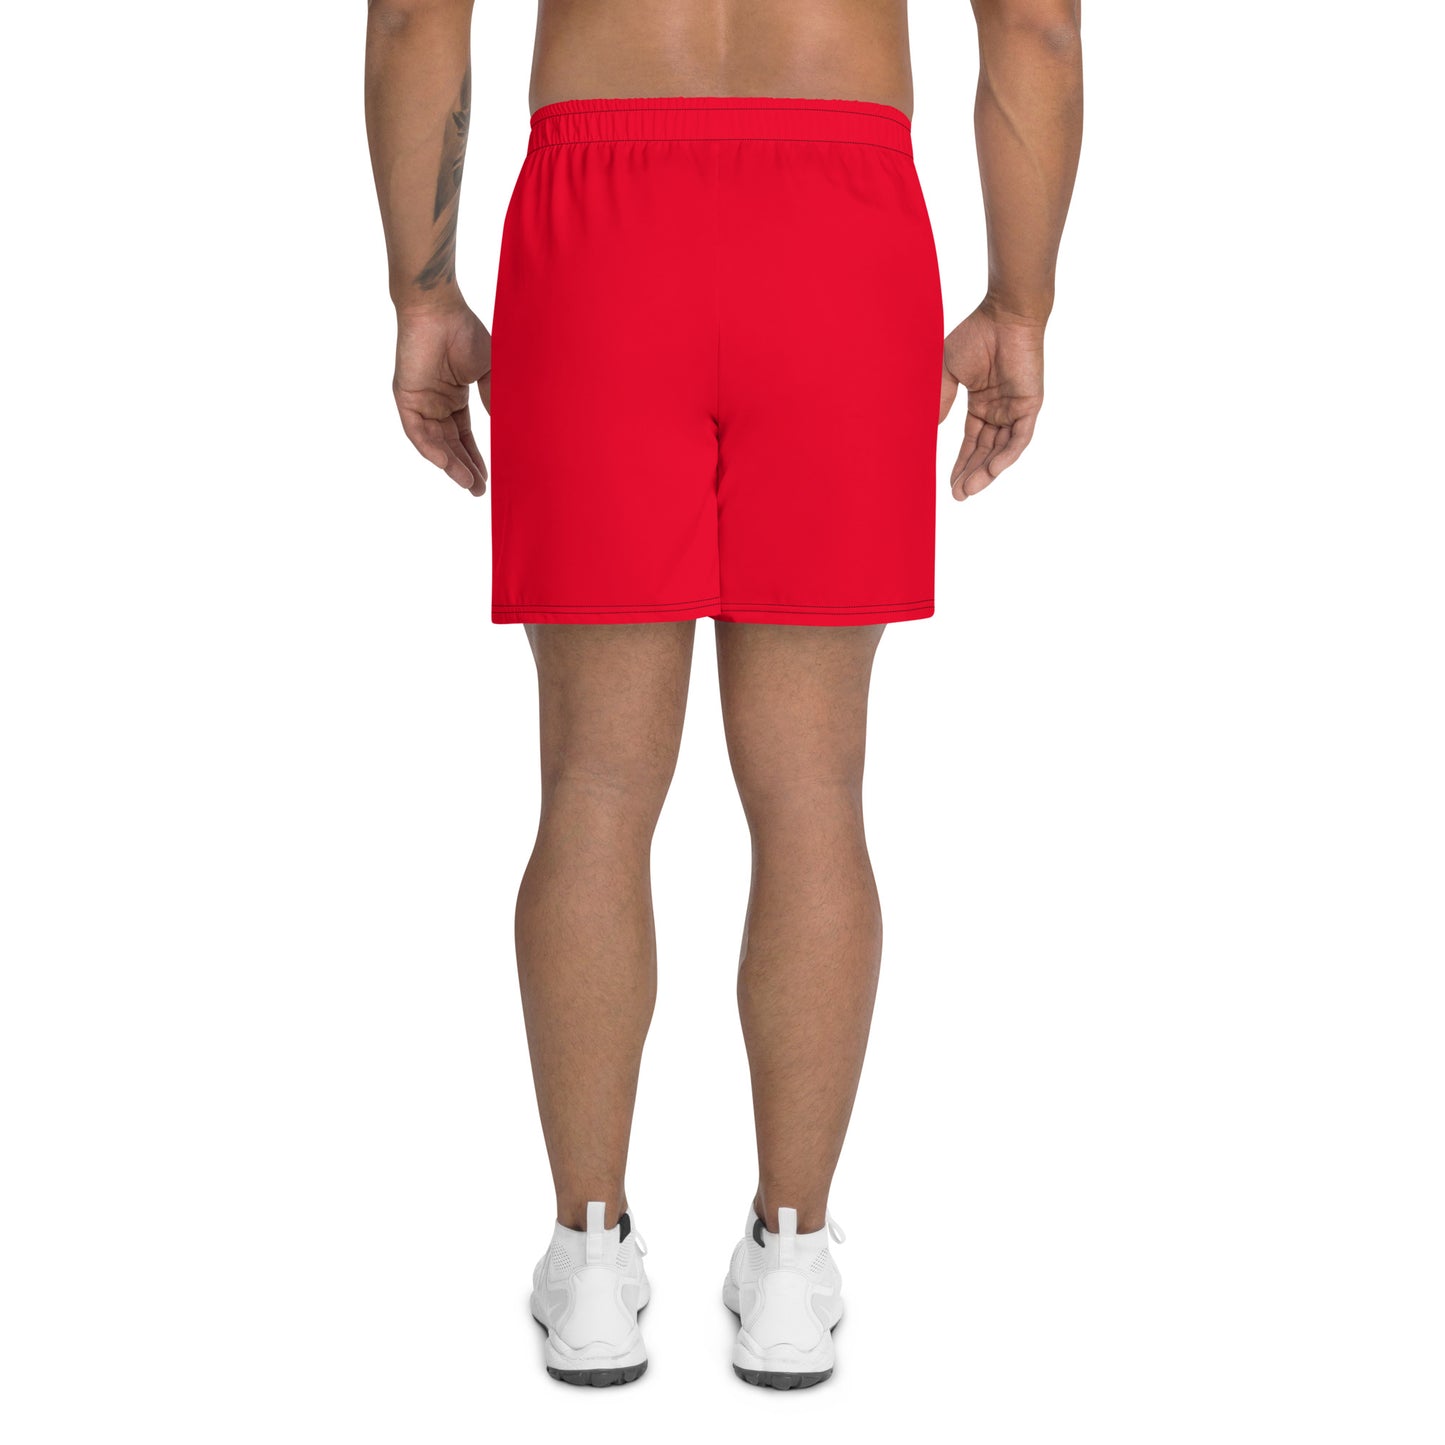 Squats and Tots Men's Recycled Athletic Shorts